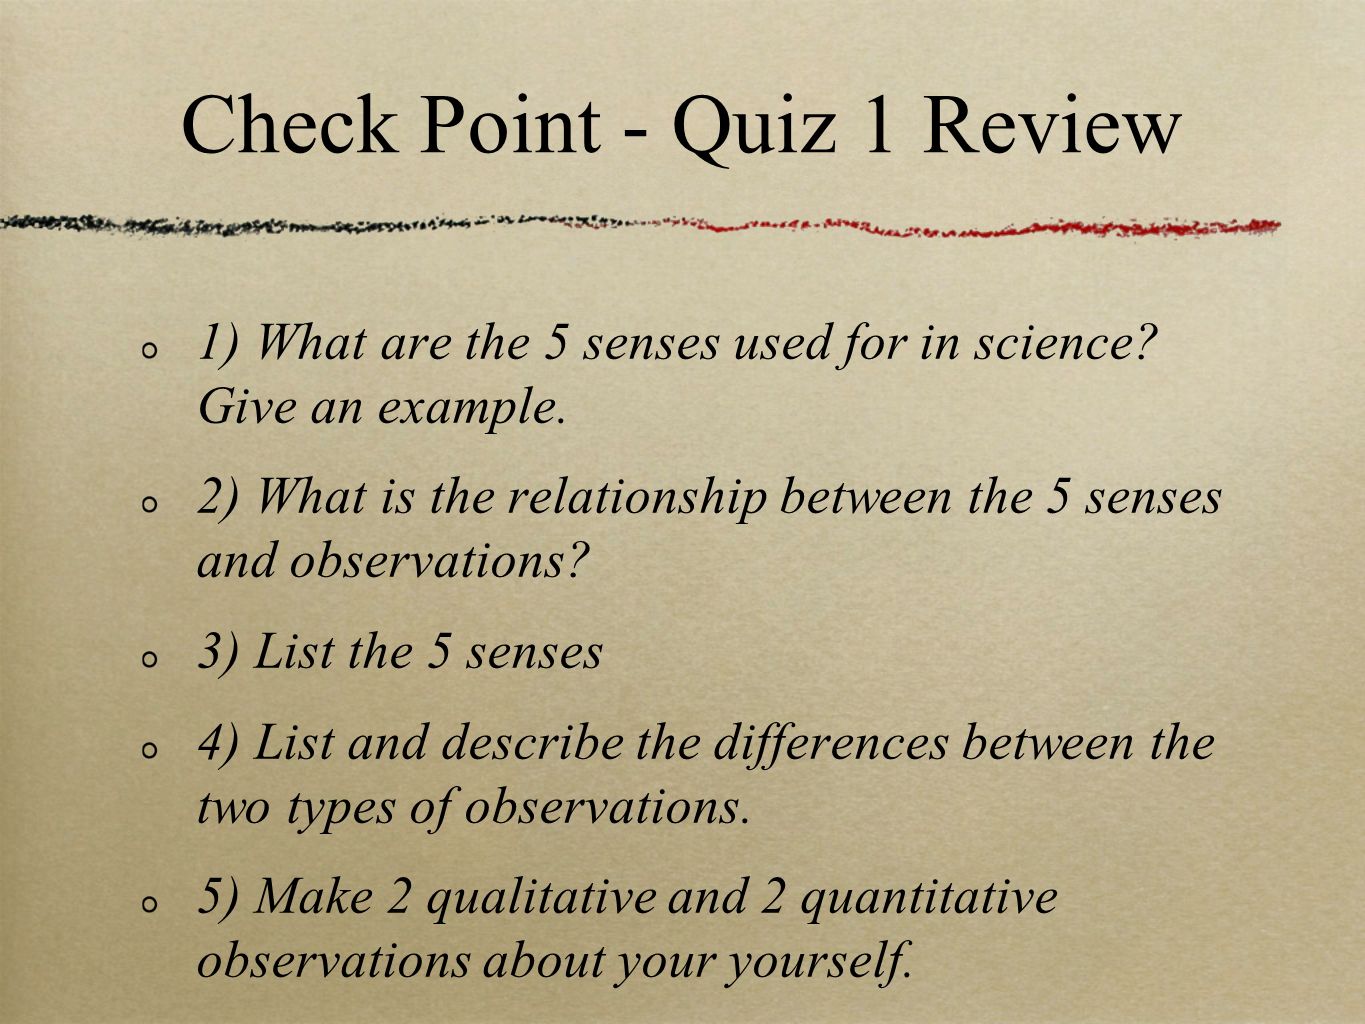 Check Point - Quiz 1 Review